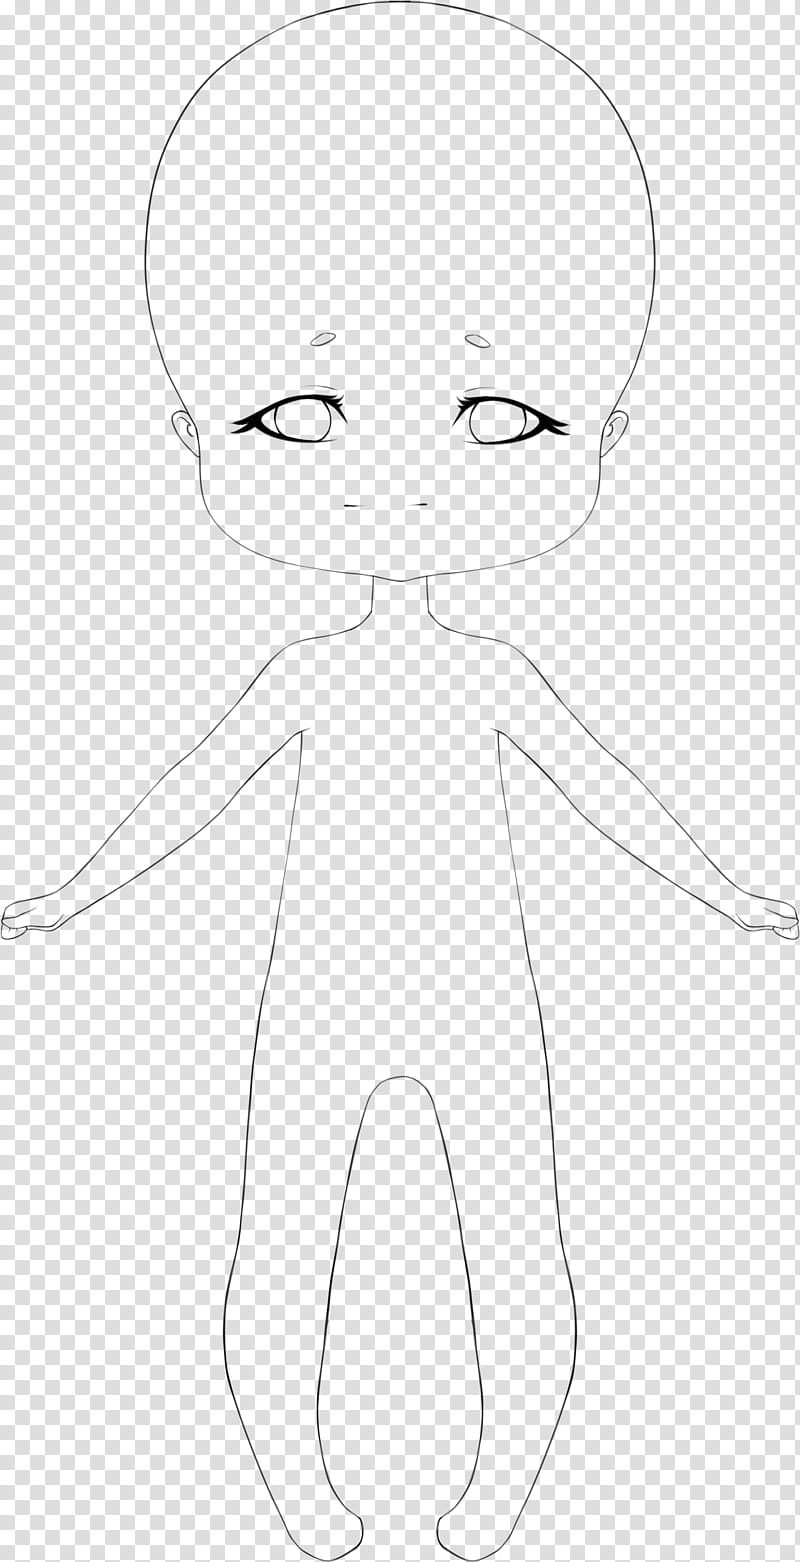 FREE USE BASE chibi girl and boy, baby's sketch transparent background PNG  clipart